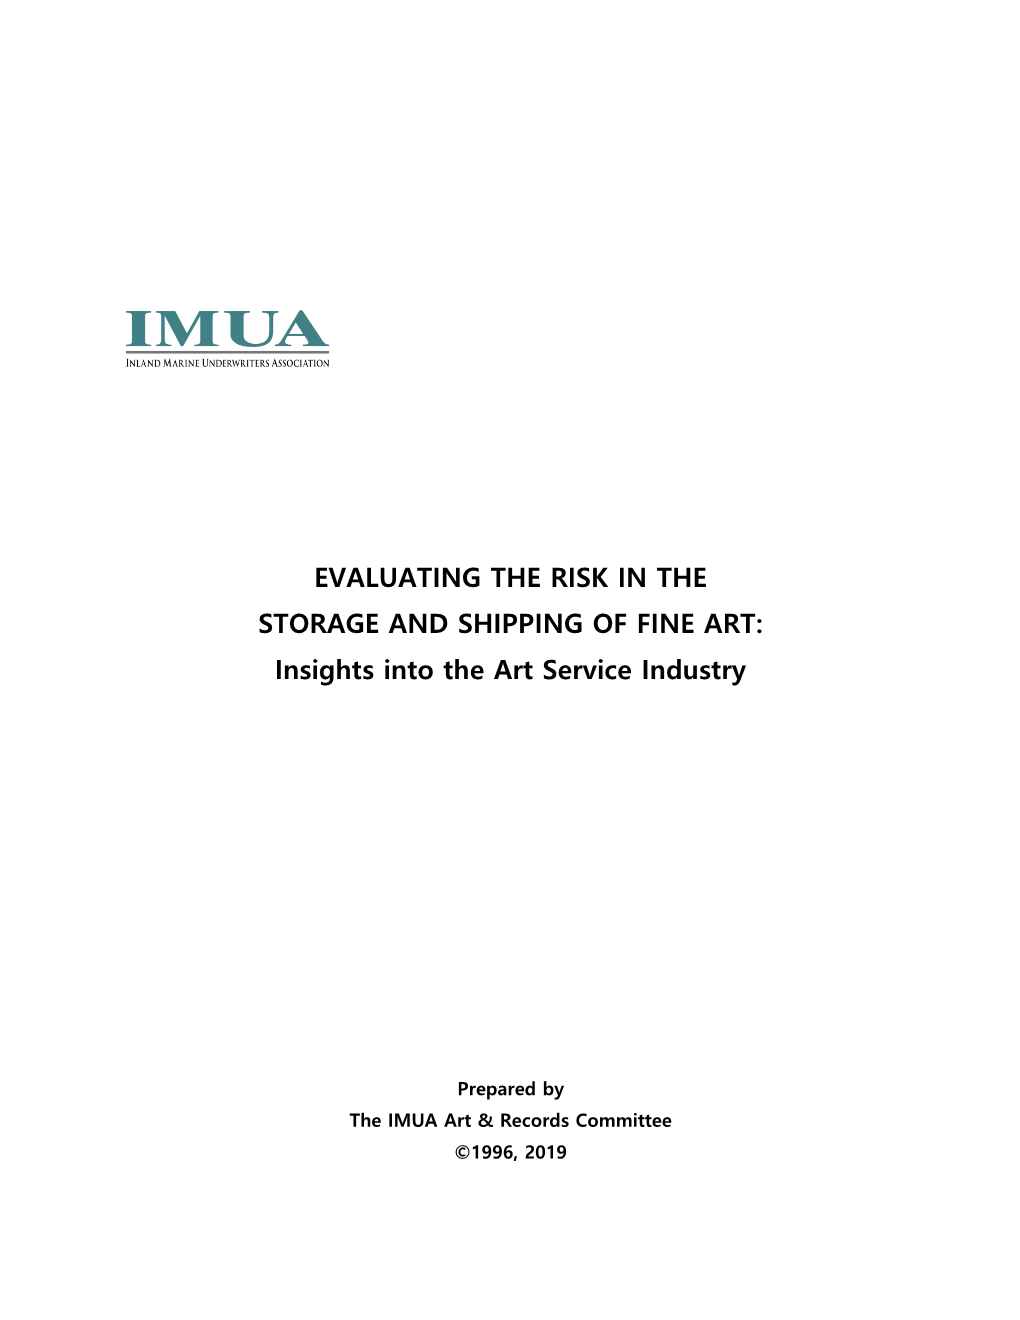 EVALUATING the RISK in the STORAGE and SHIPPING of FINE ART: Insights Into the Art Service Industry